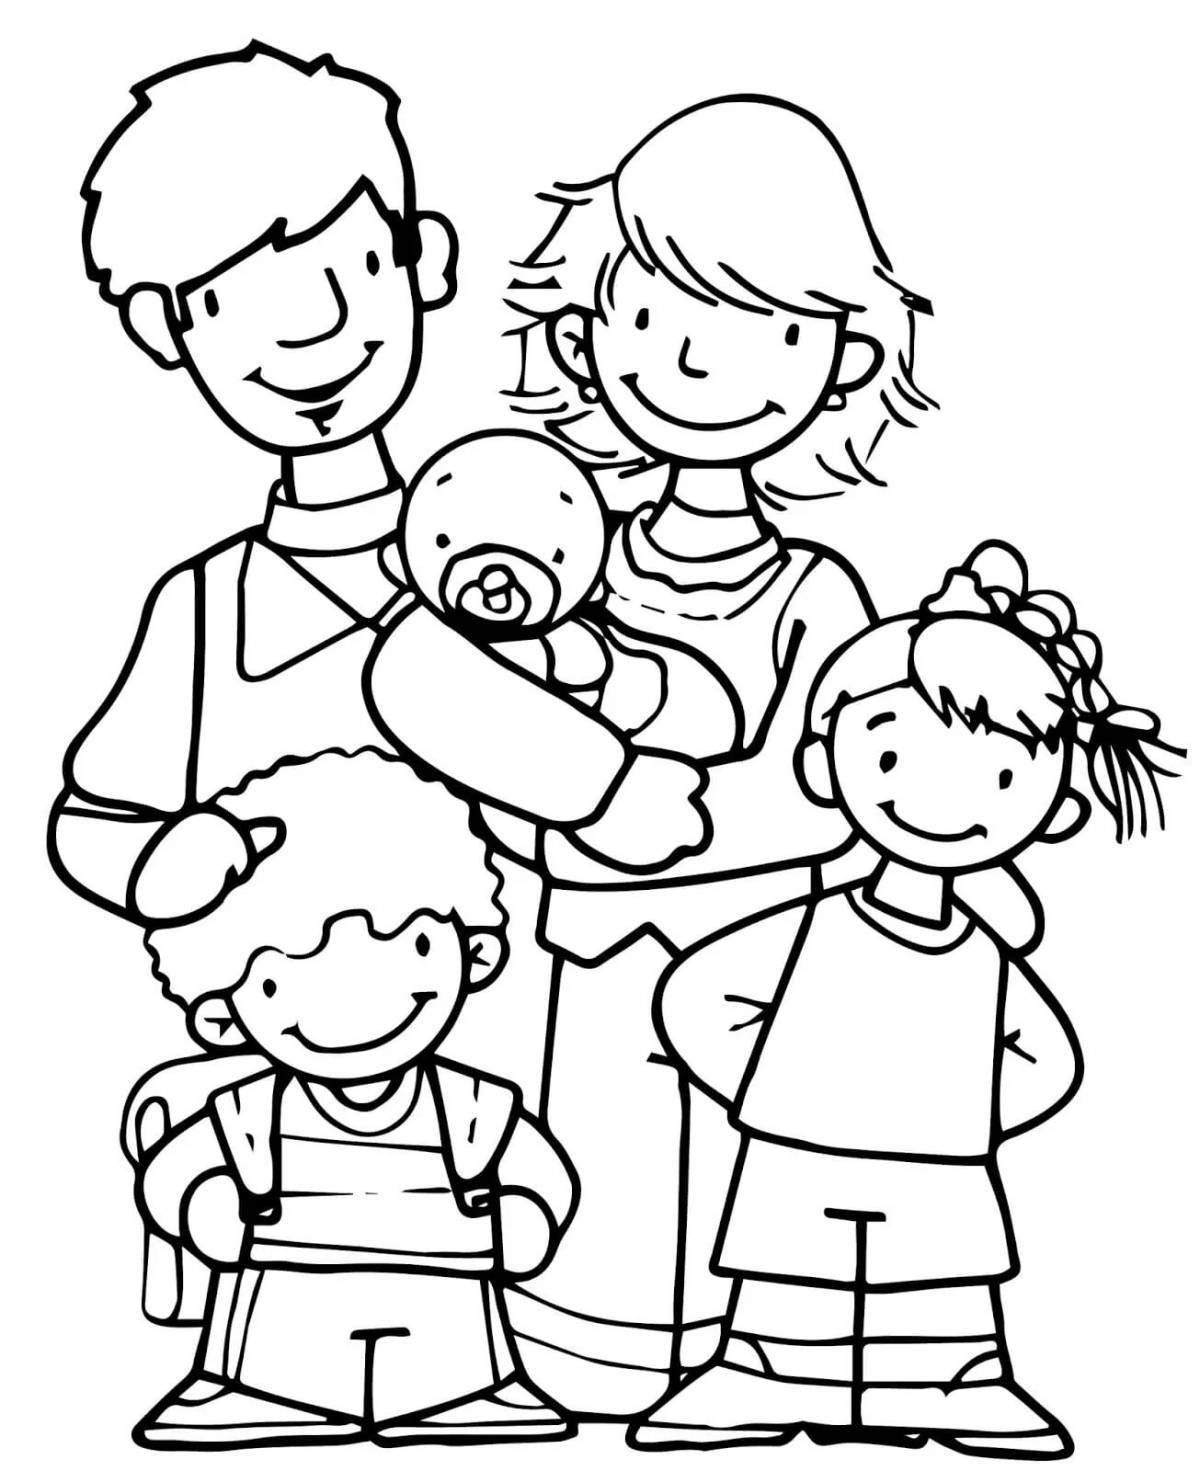 Creative family coloring book for 7 year olds